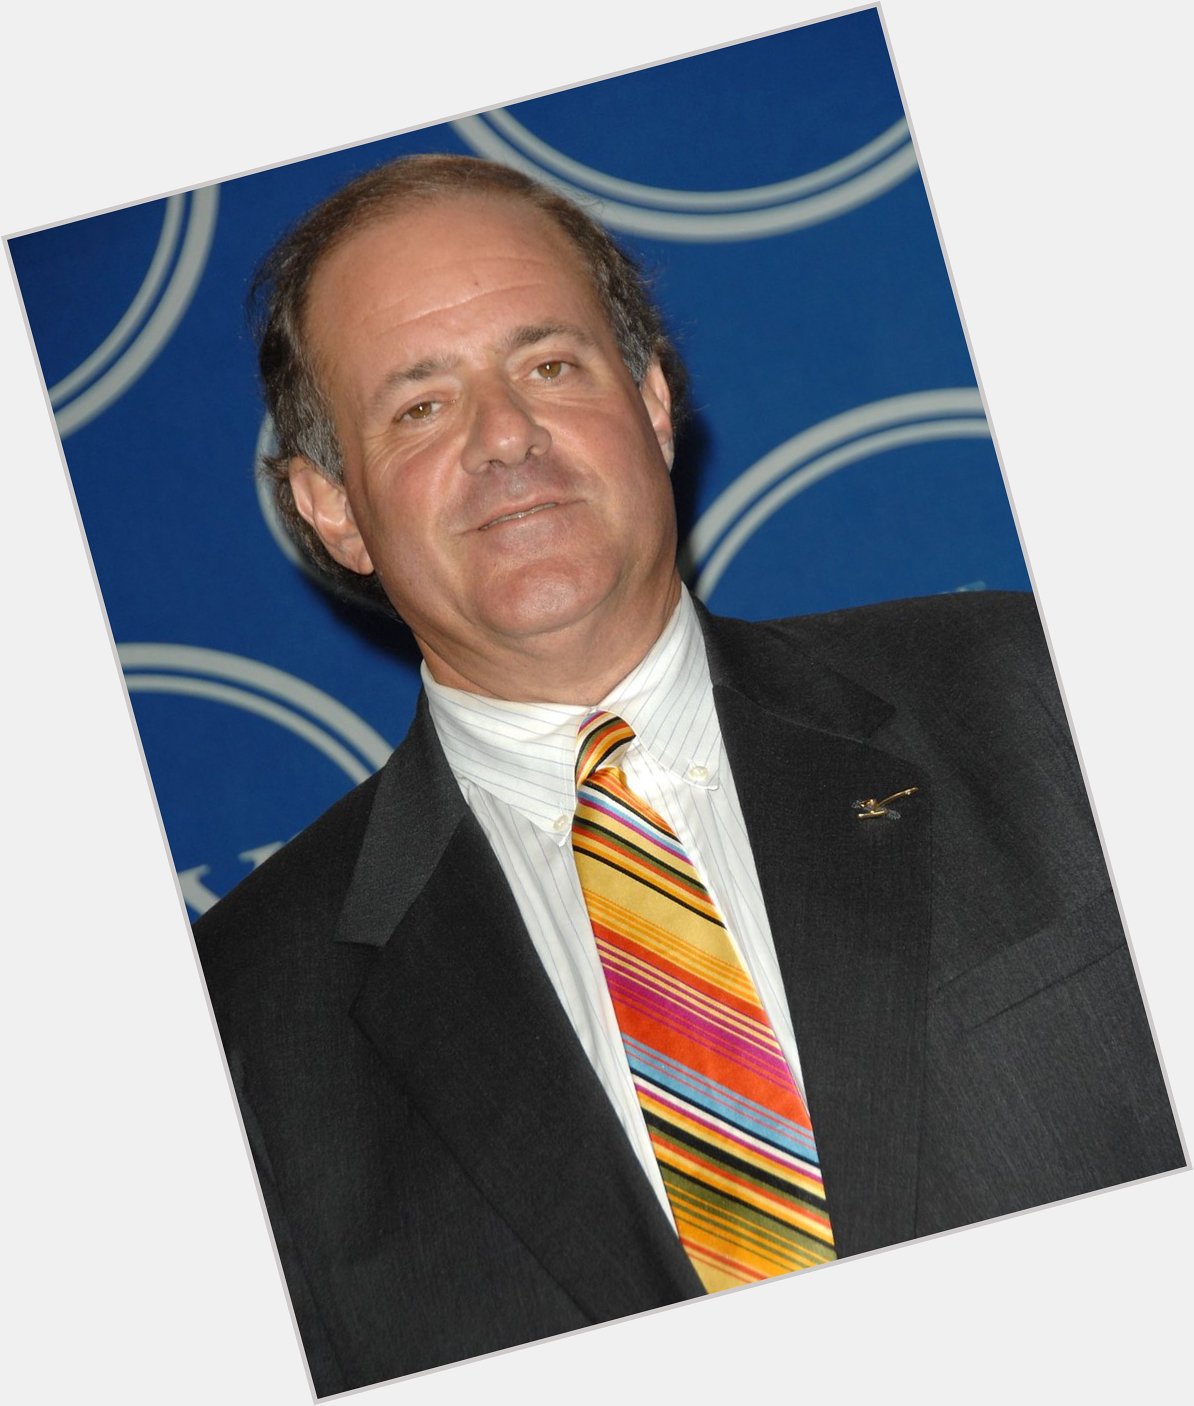 Happy birthday the man himself Chris Berman. ESPN has not been the same without him. 